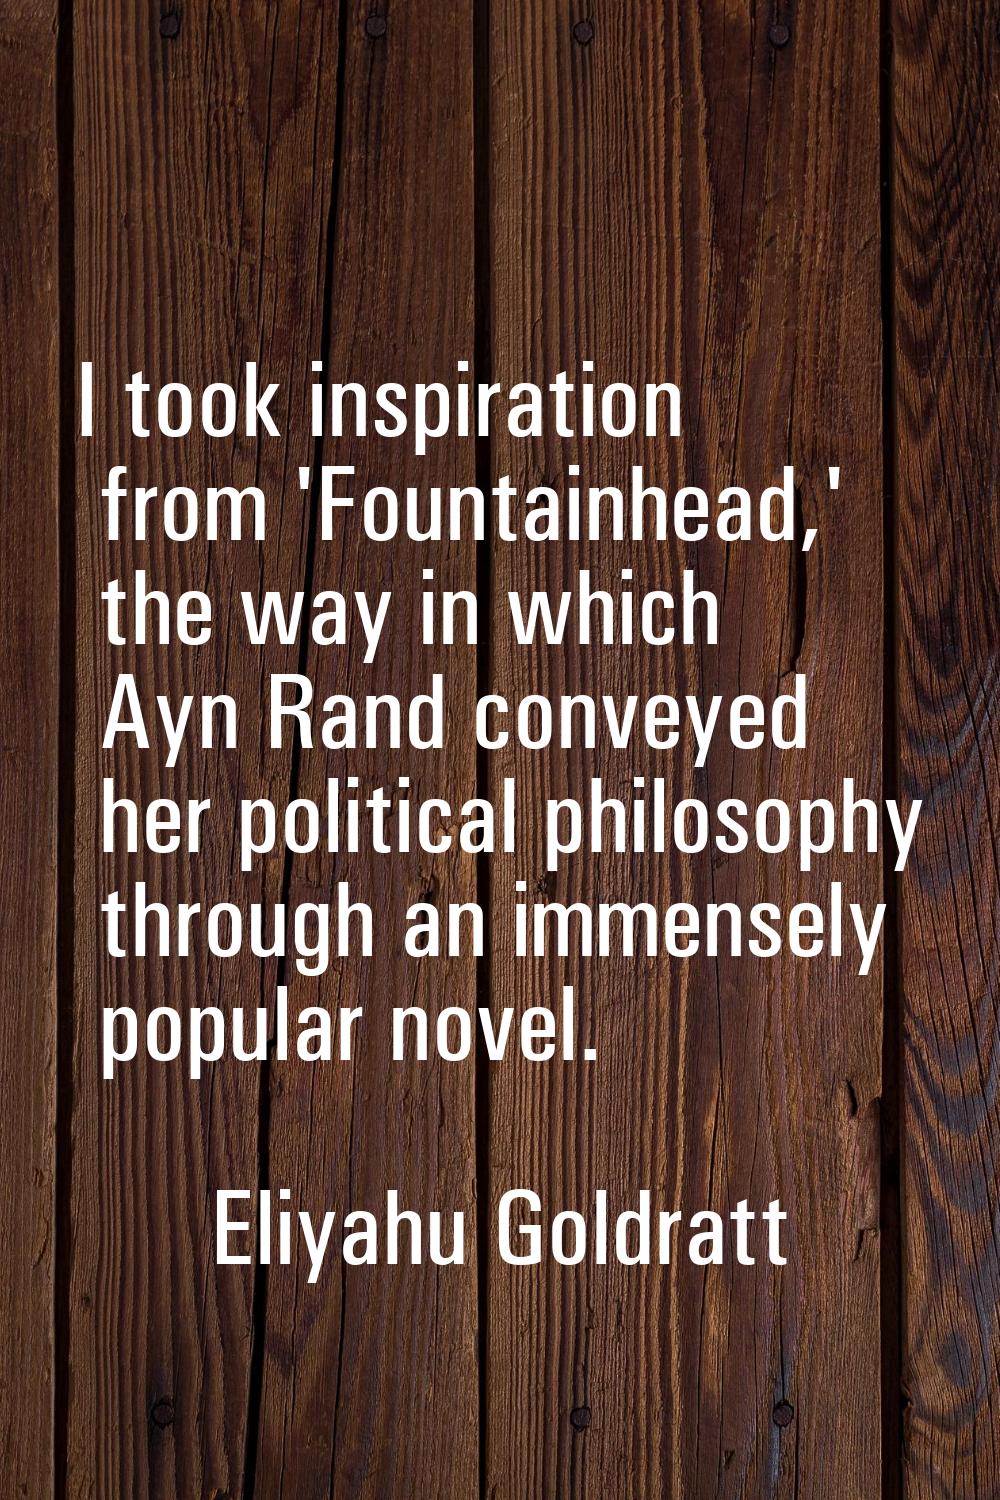 I took inspiration from 'Fountainhead,' the way in which Ayn Rand conveyed her political philosophy